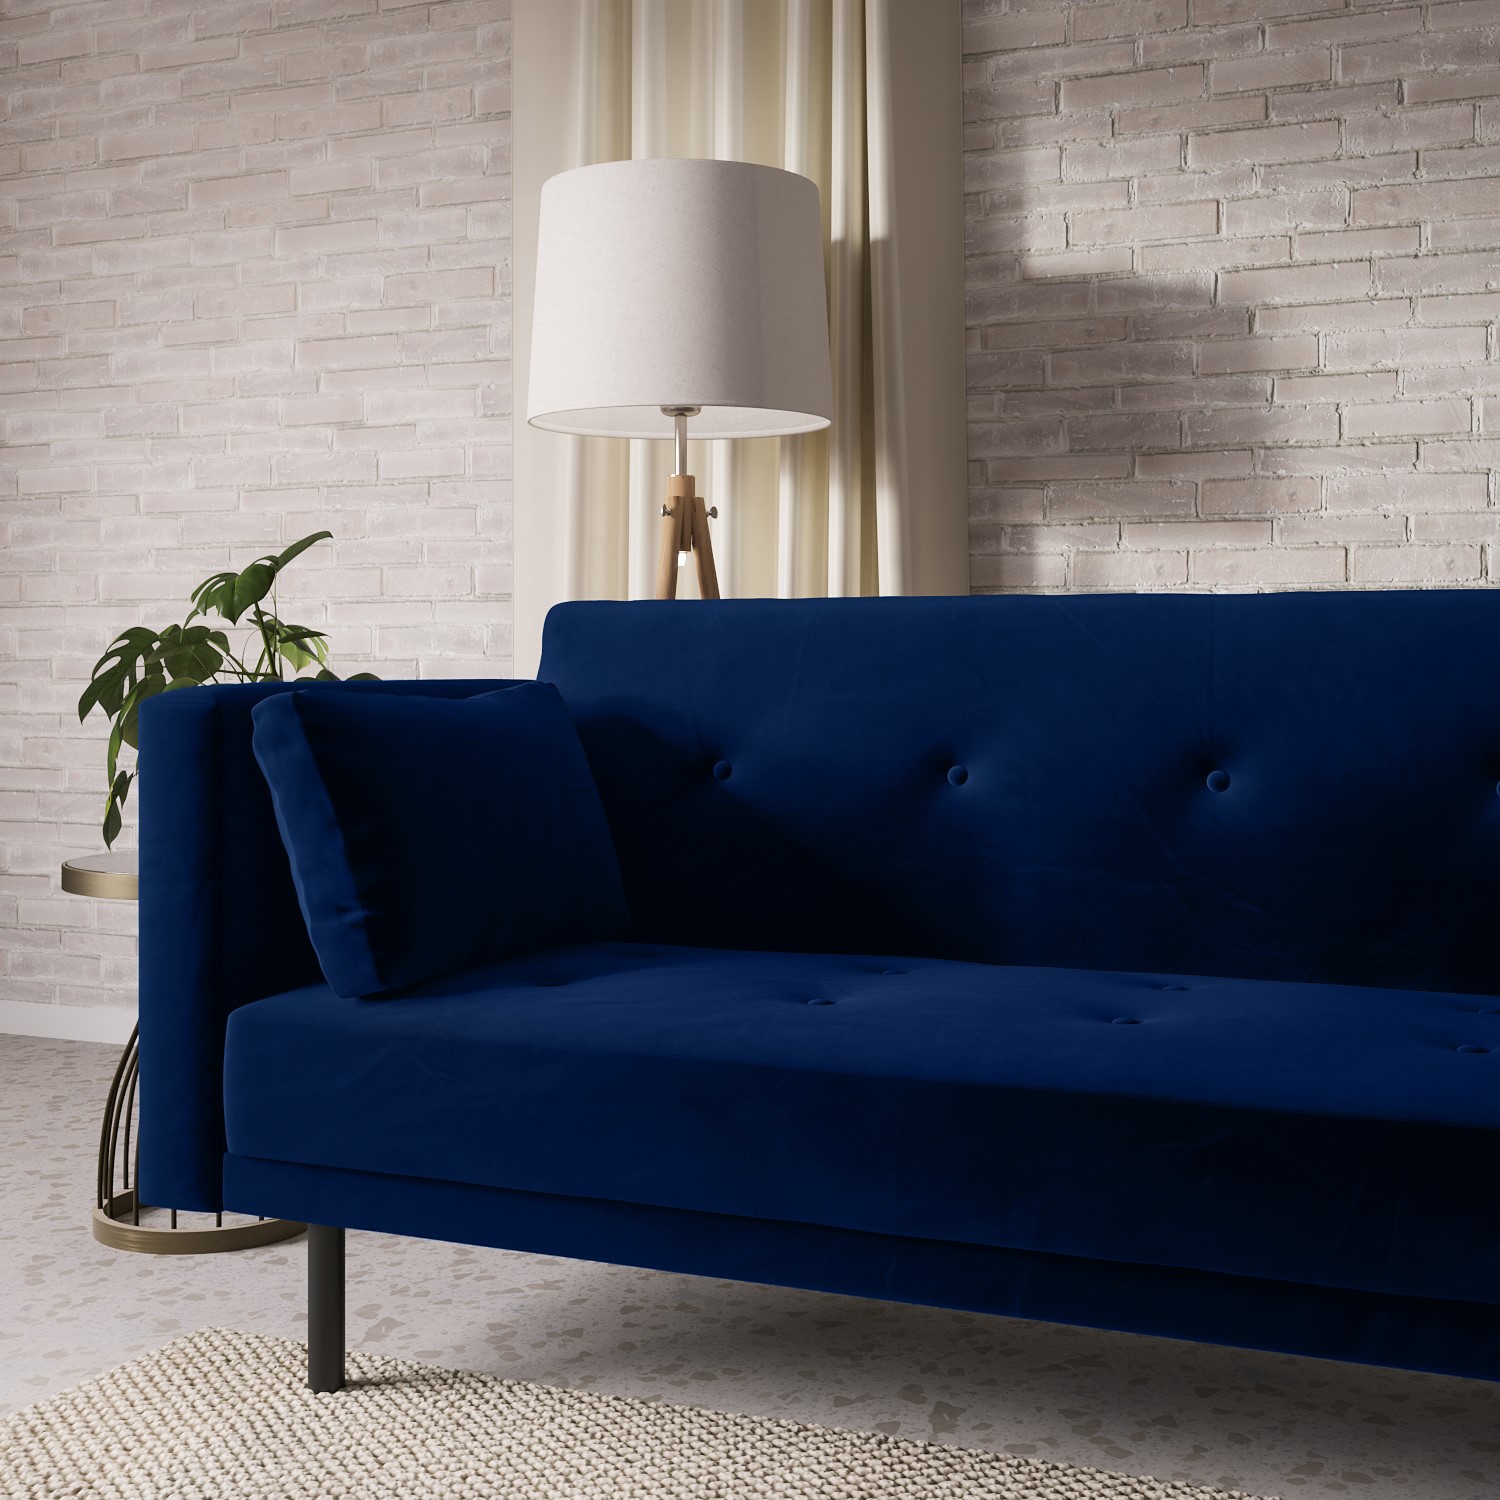 Read more about Navy velvet click clack sofa bed seats 3 rory